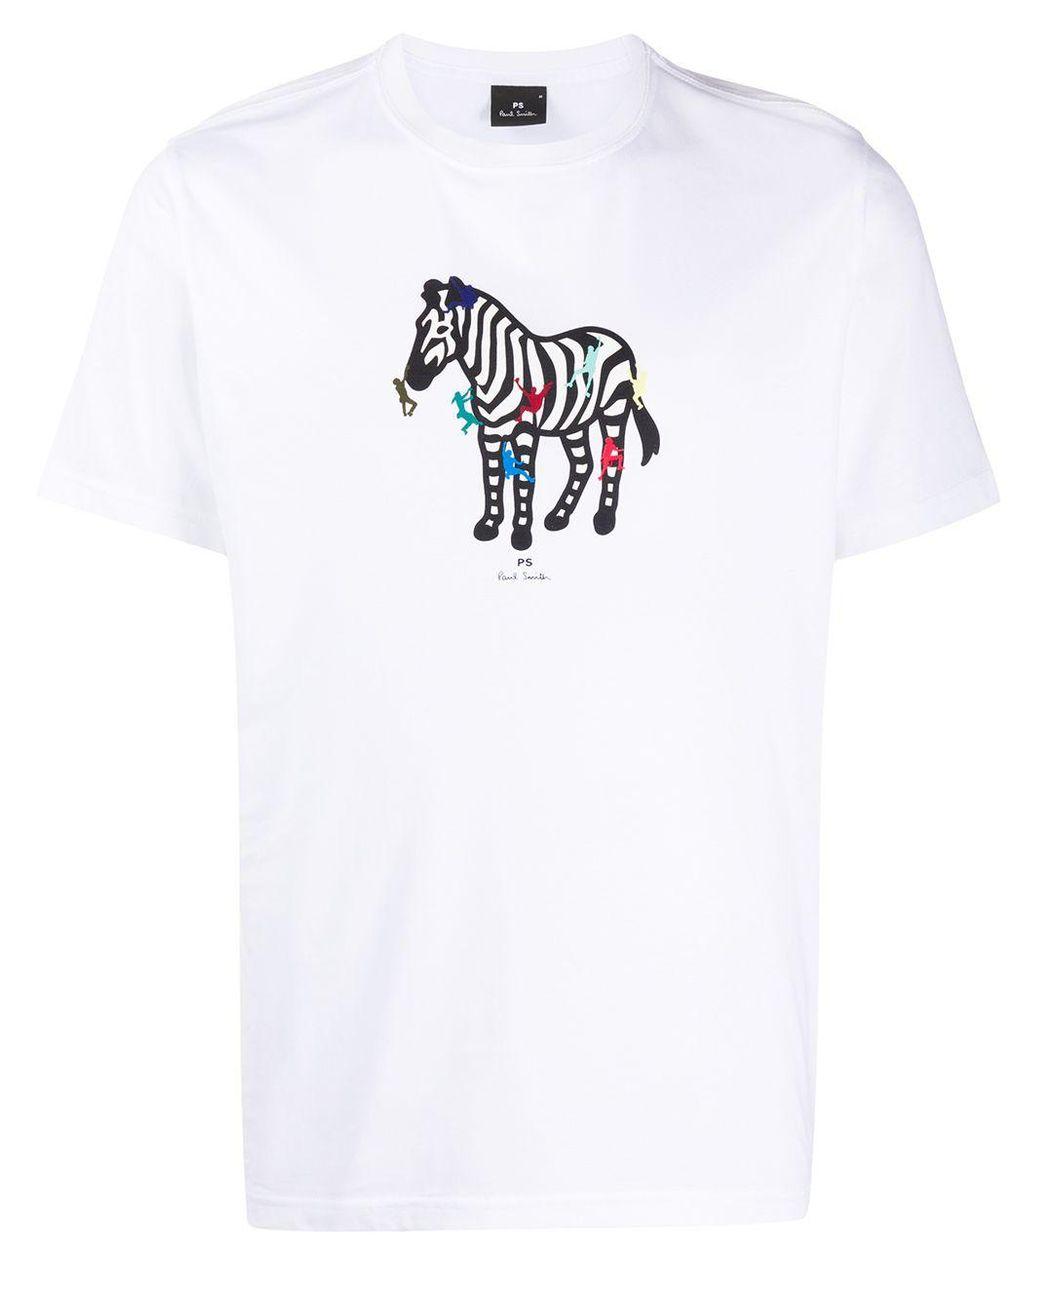 PS by Paul Smith Zebra-print Organic Cotton T-shirt in White for Men - Lyst